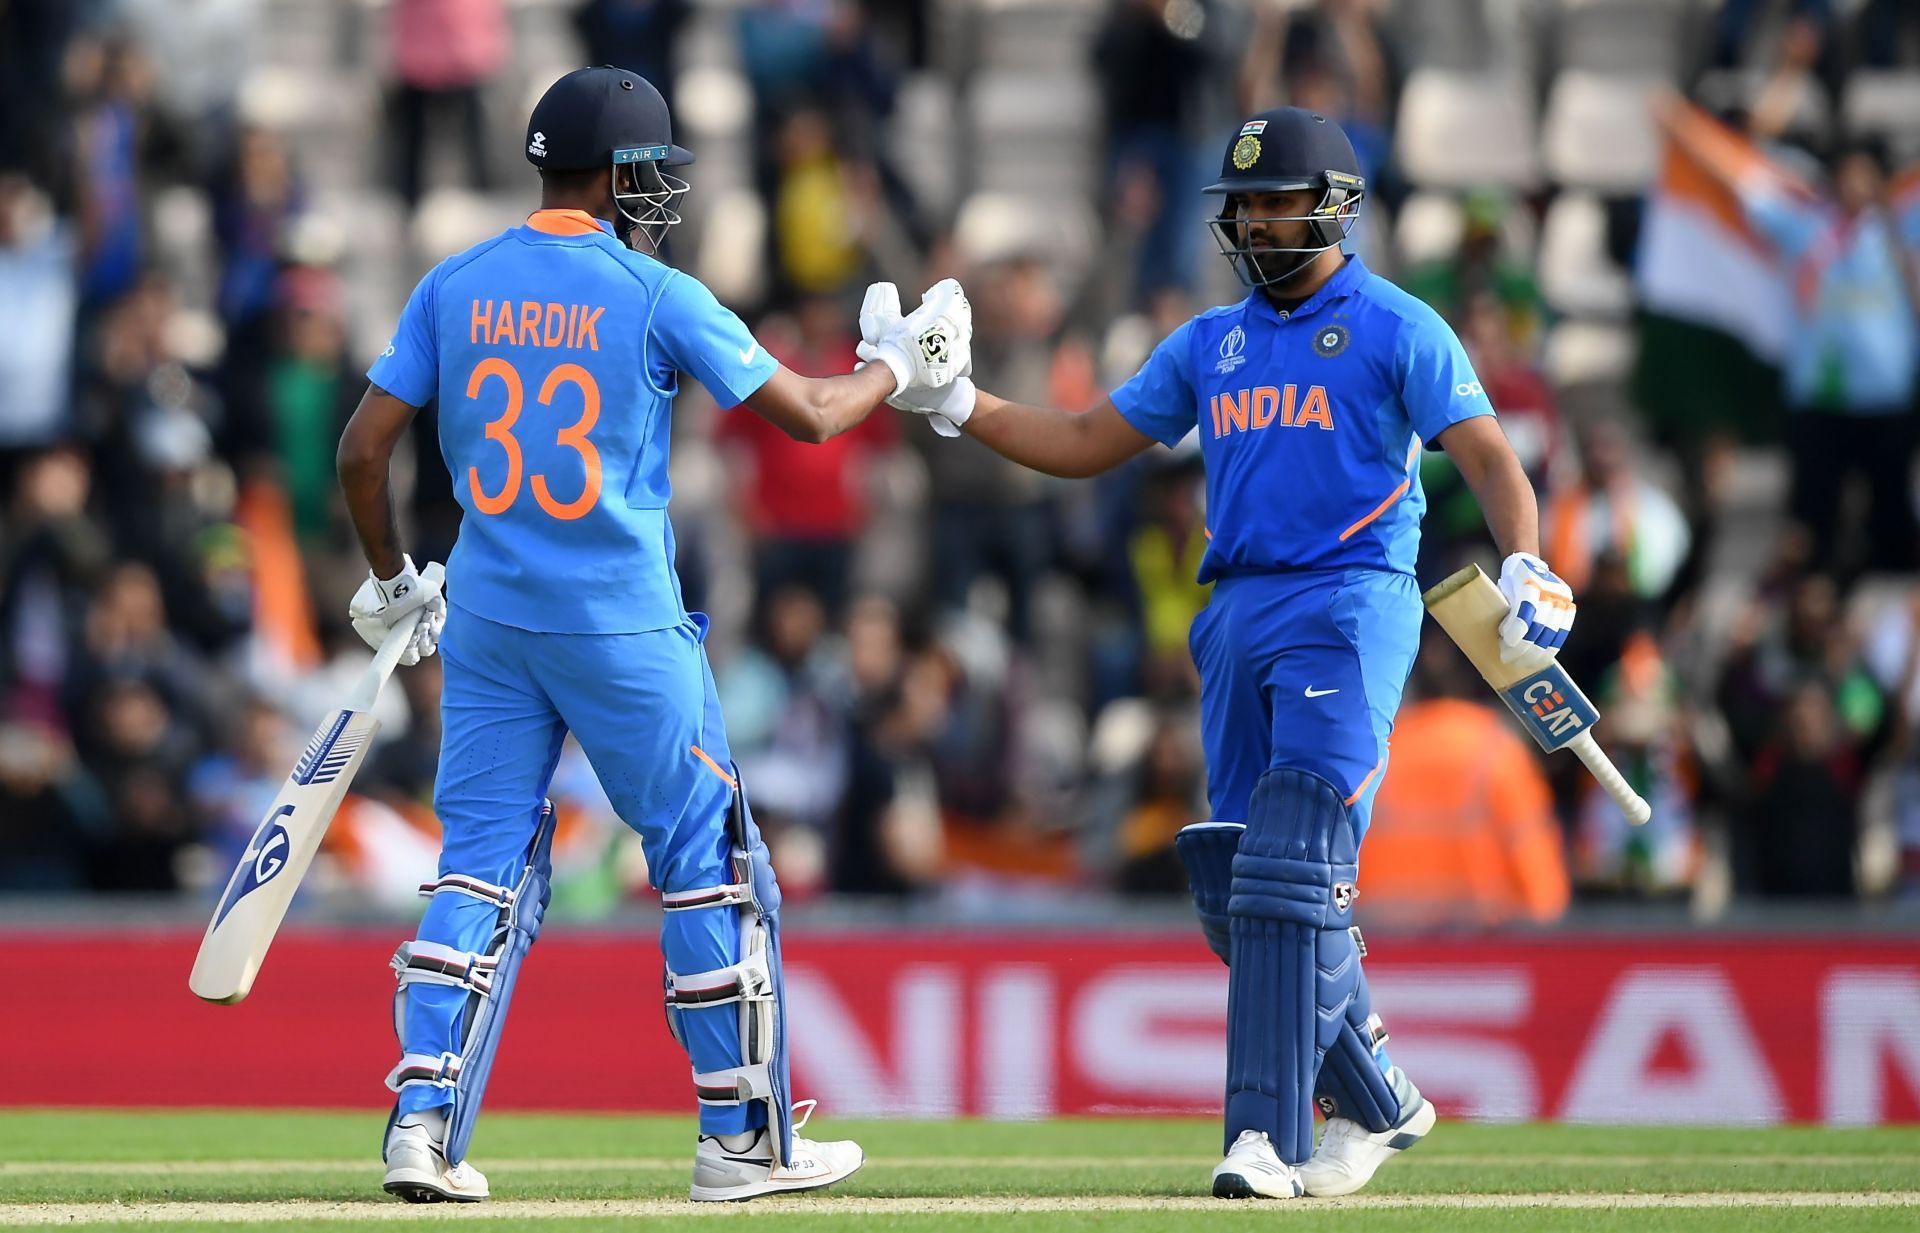 India could tweak the balance of their batting order